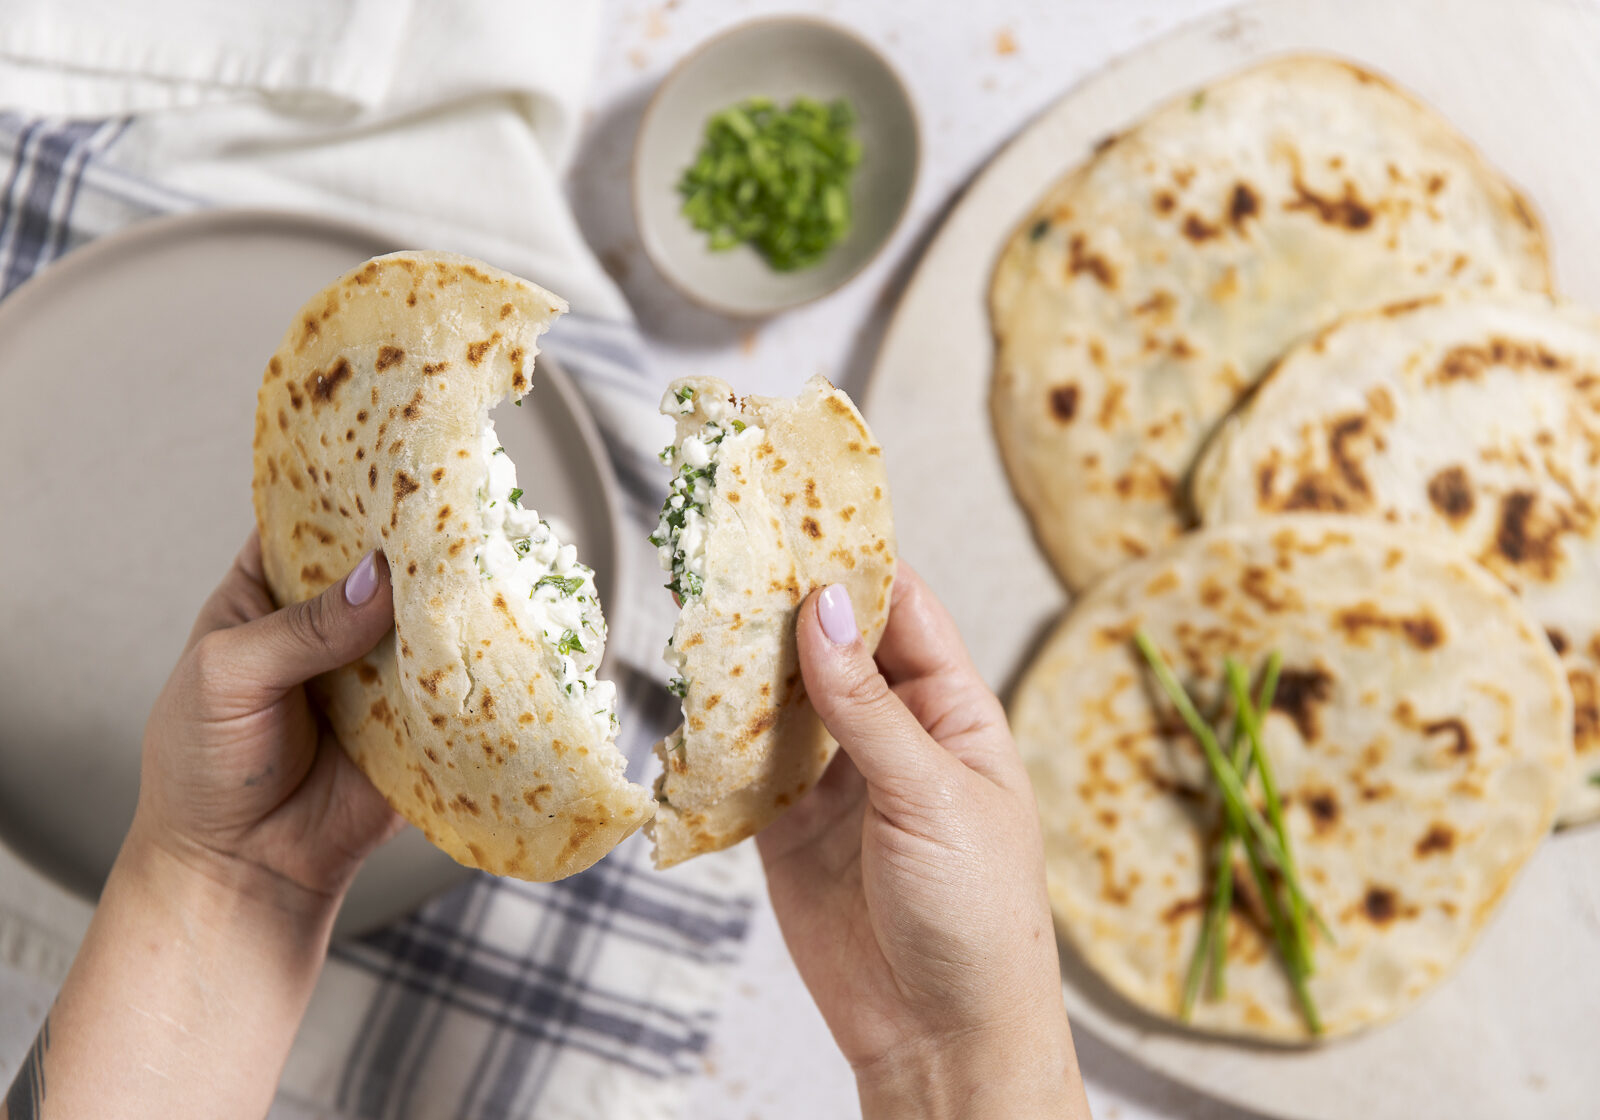 Stuffed flatbread with cottage cheese and herbs